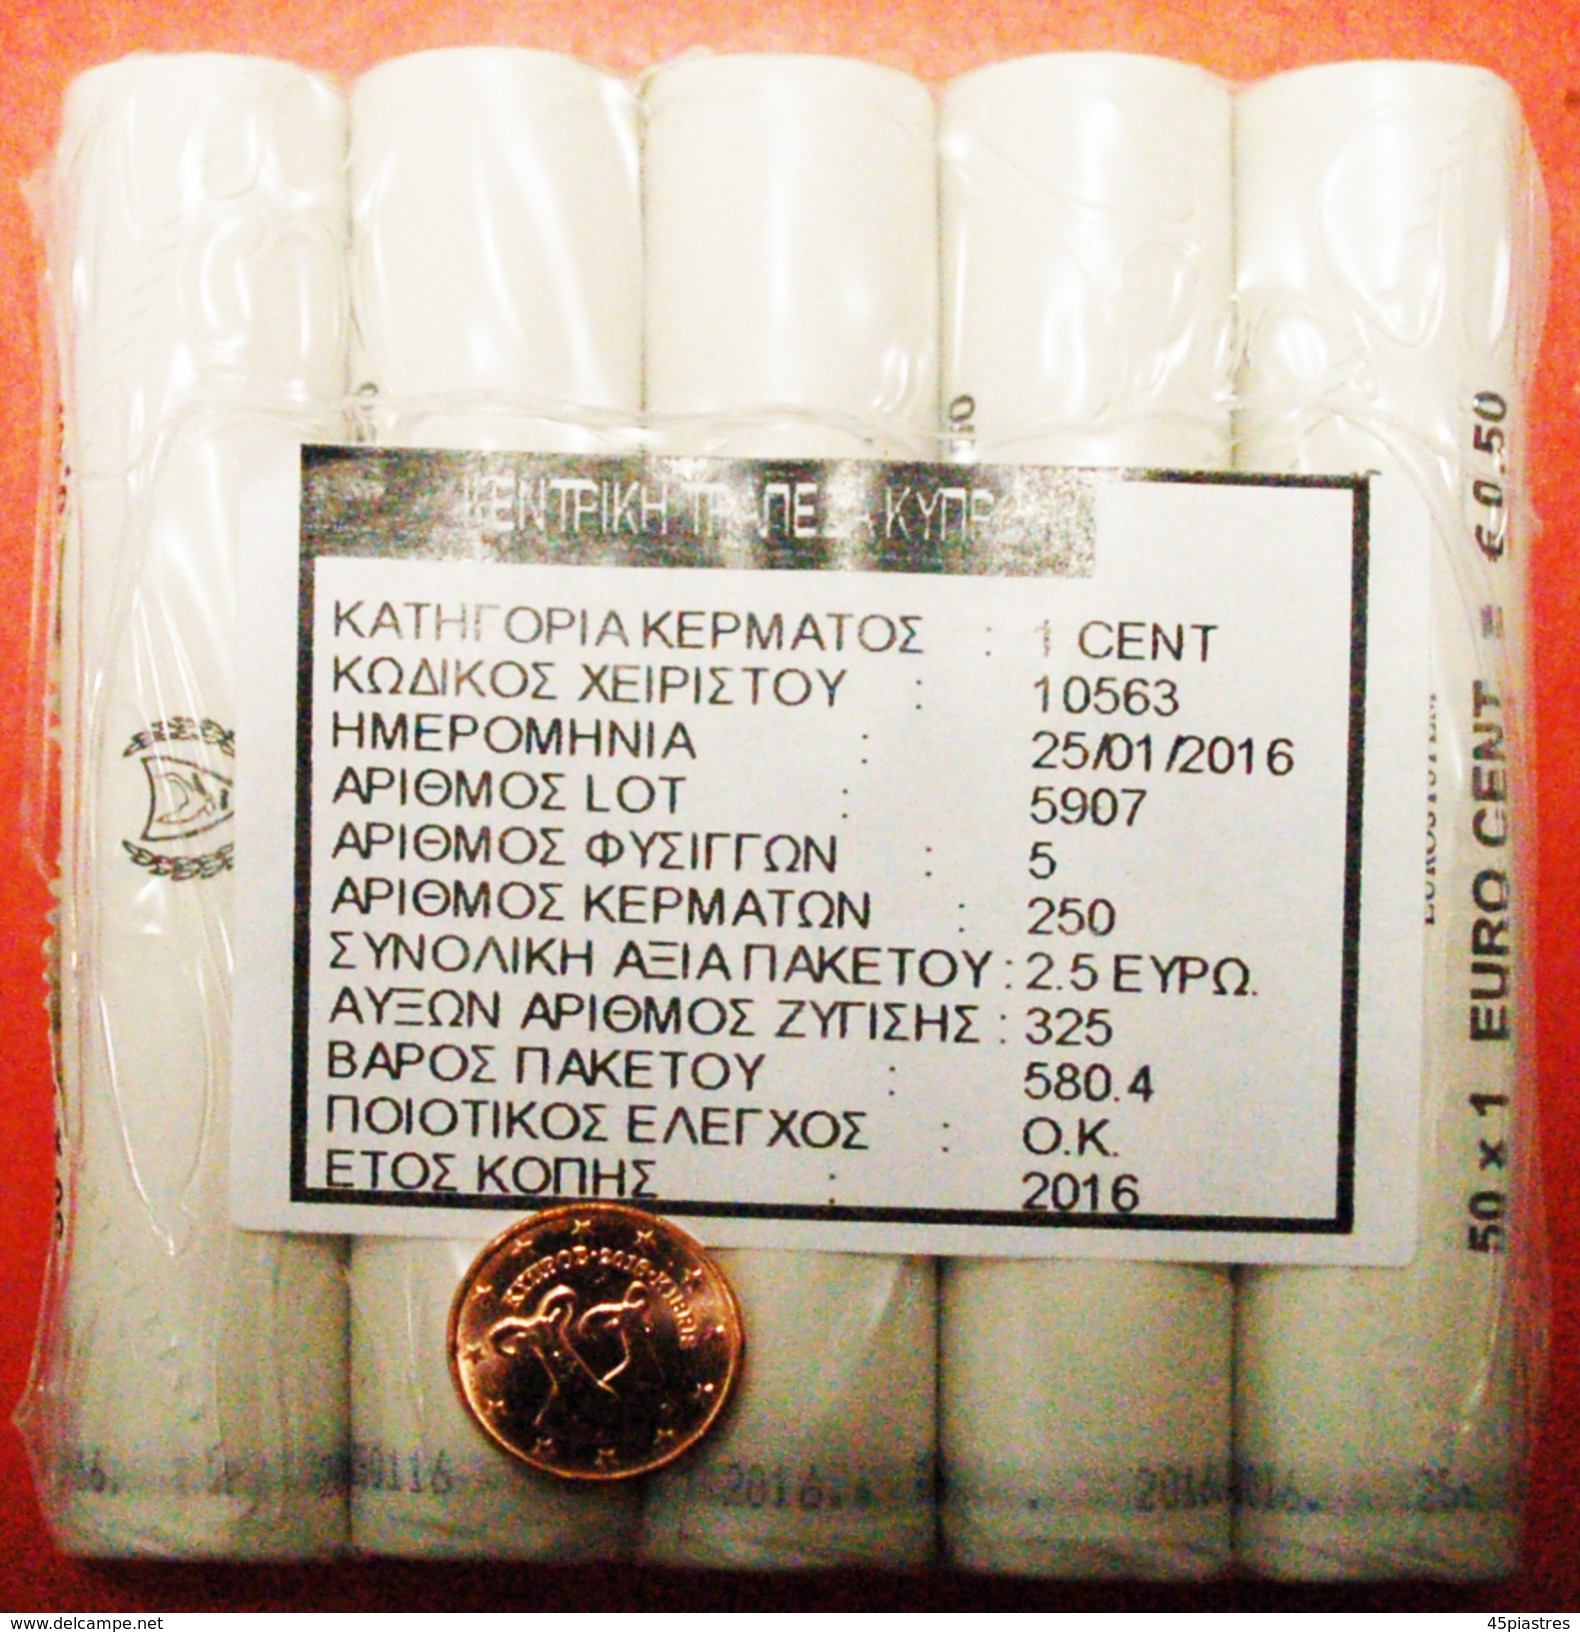 √ GREECE: CYPRUS  1 CENT 2016 UNC 5 ROLL (250 COINS)! LOW START  NO RESERVE! - Rollos